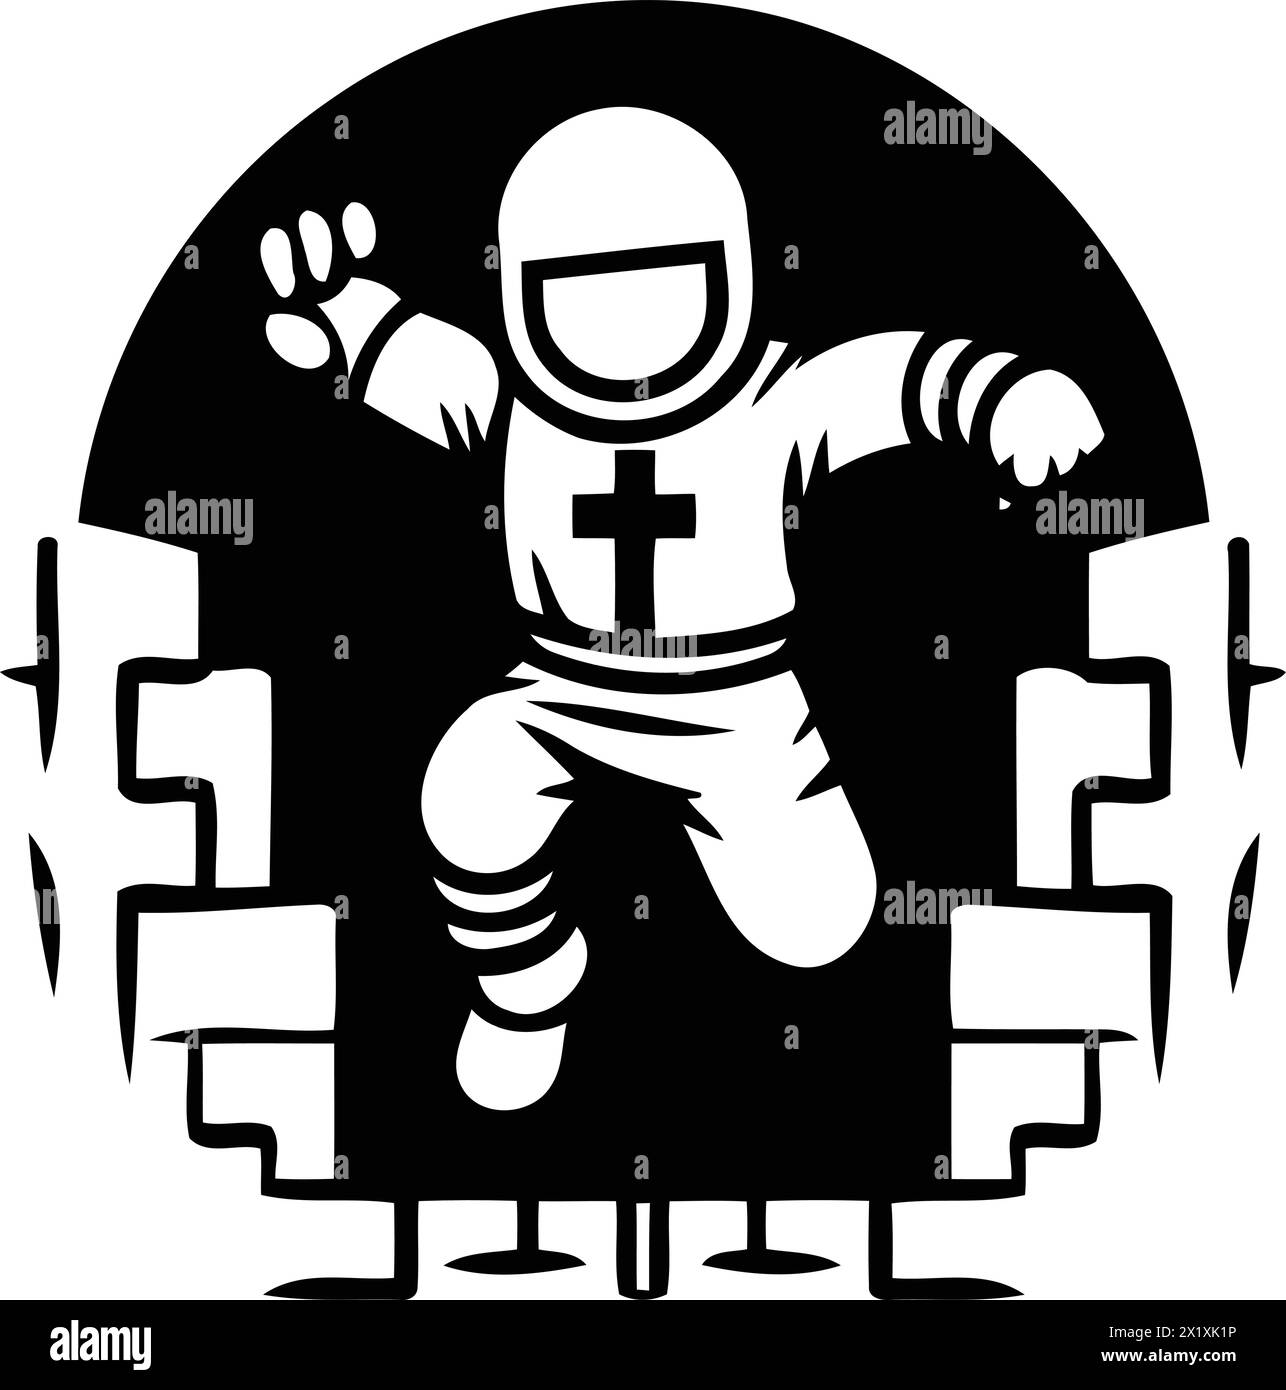 Astronaut in space suit. Astronaut icon. Vector illustration Stock Vector